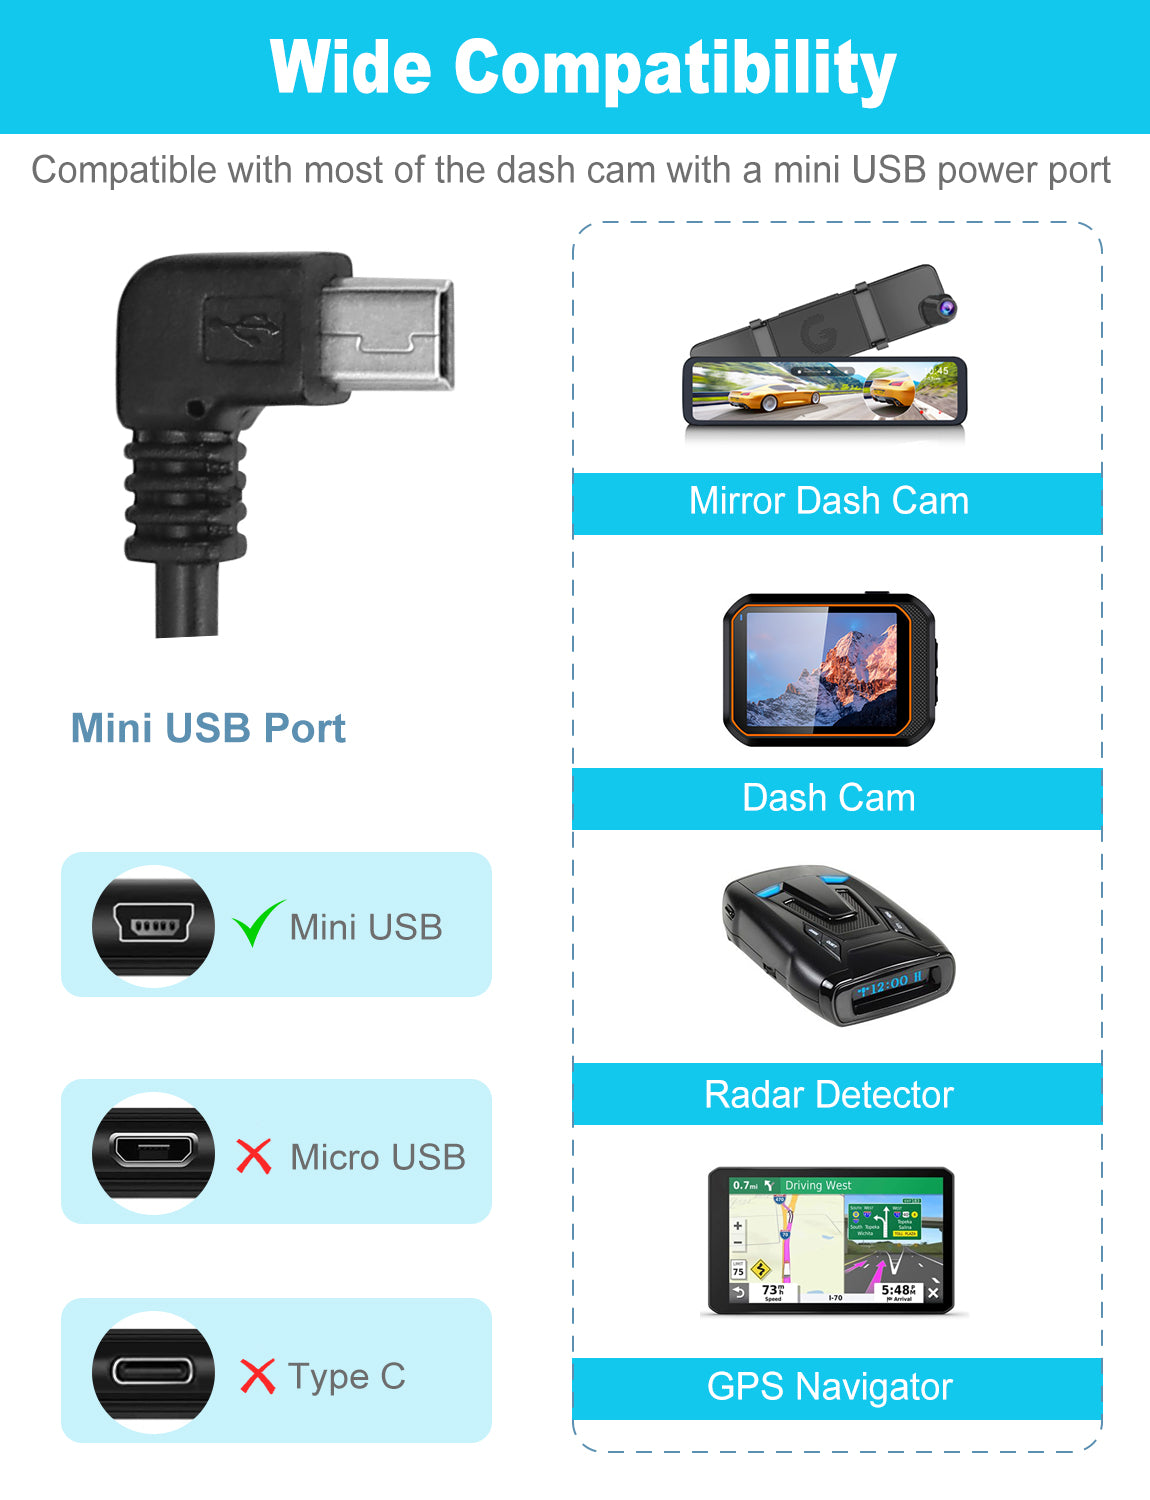 Dash cam hardwire kit compatible with most dash cams featuring a mini USB port.